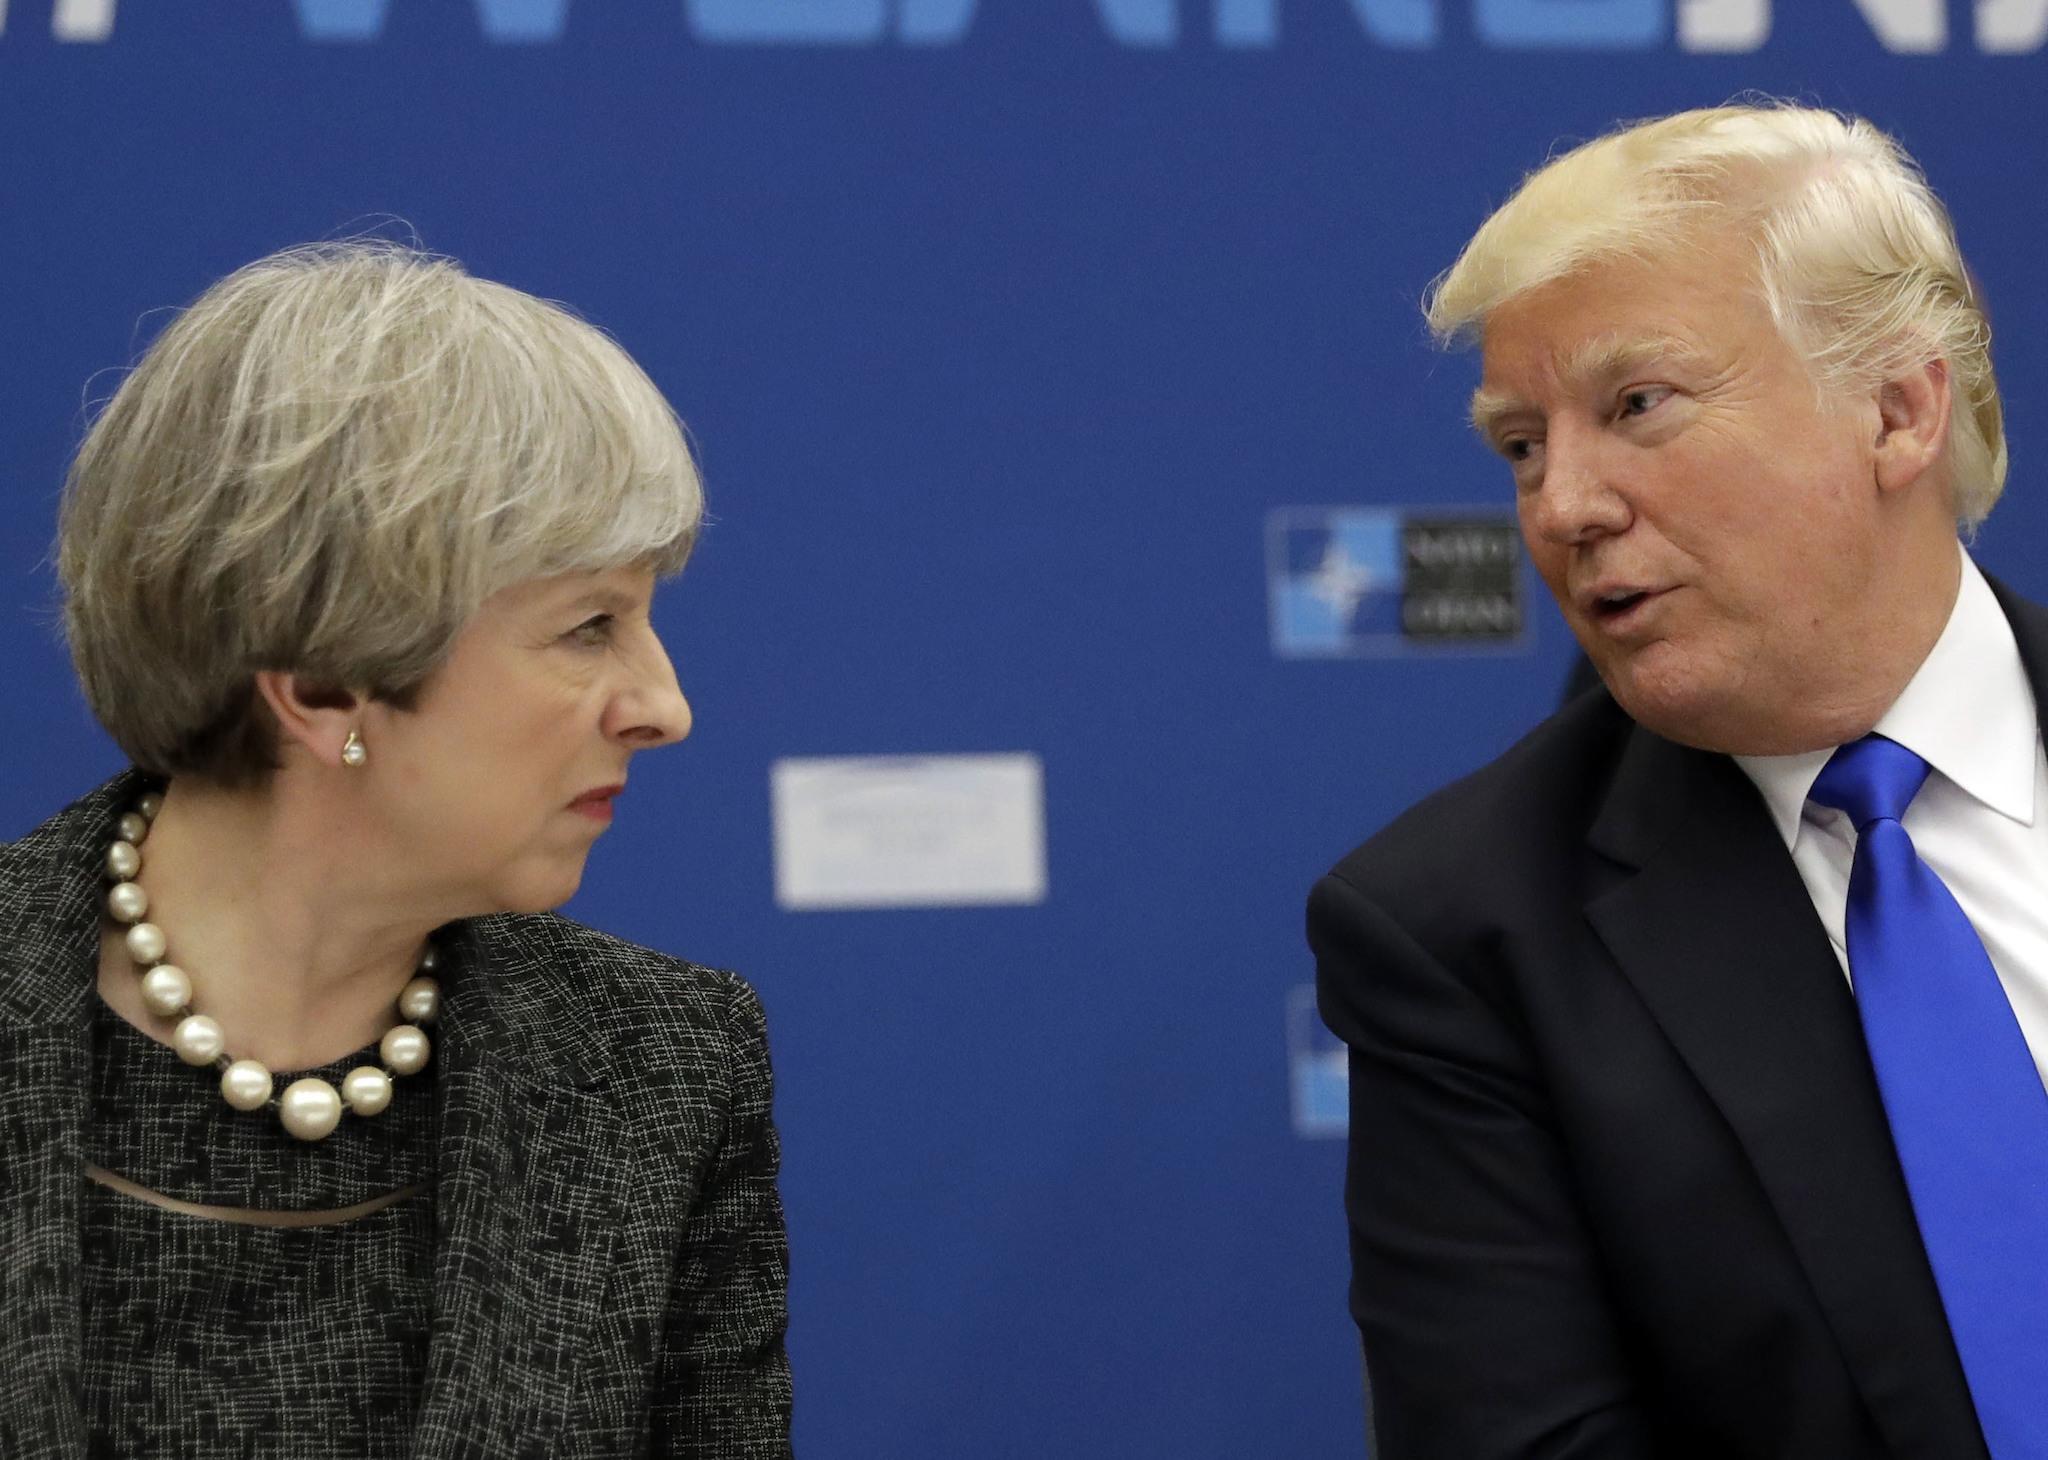 President Donald Trump speaks to British Prime Minister Theresa May during in a working dinner meeting at the NATO headquarters